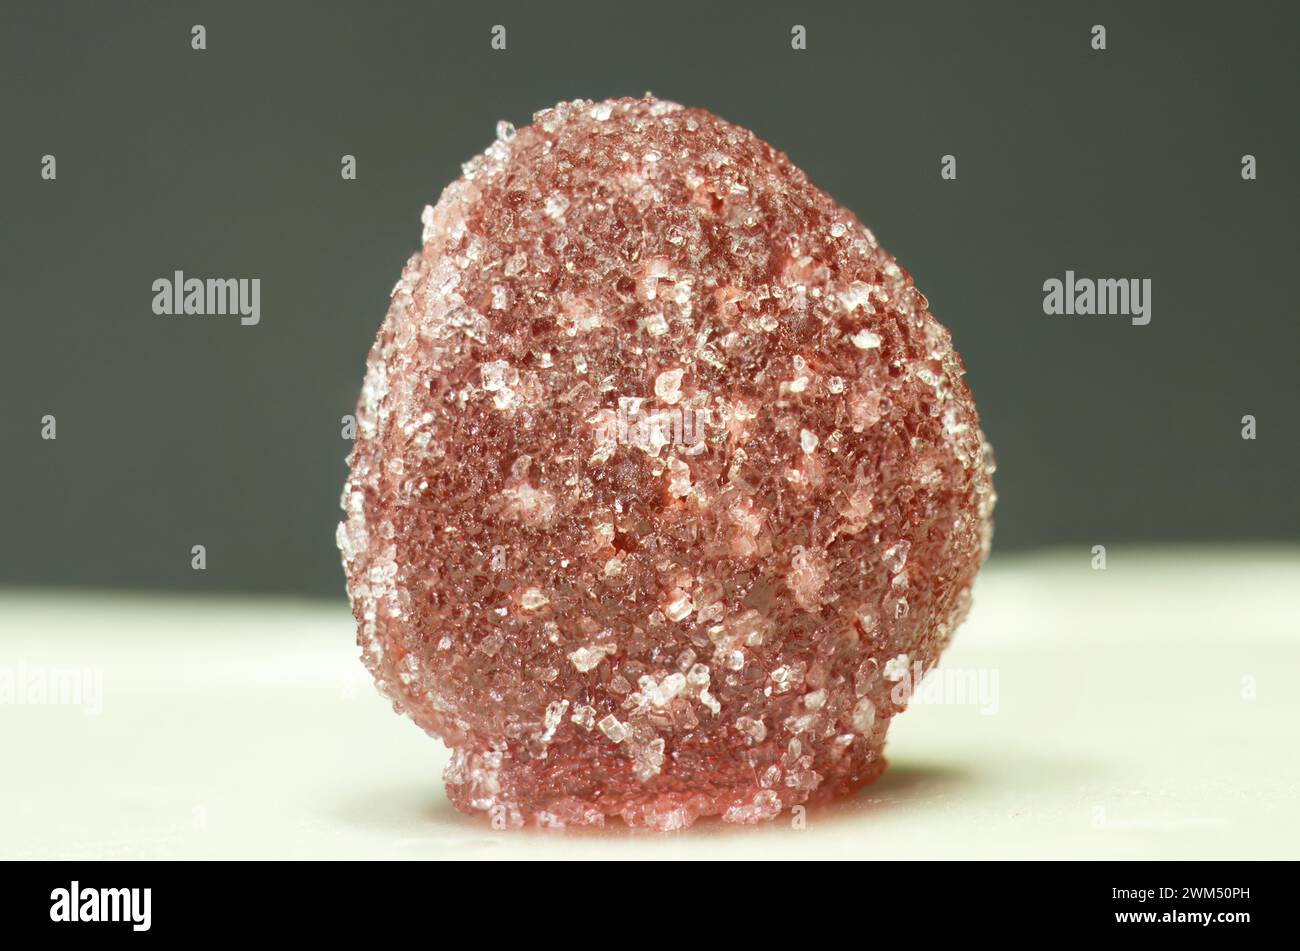 Sugar crystals sprinkled on red gumdrop jelly soft candy in selective focus isolated on dark green background Stock Photo